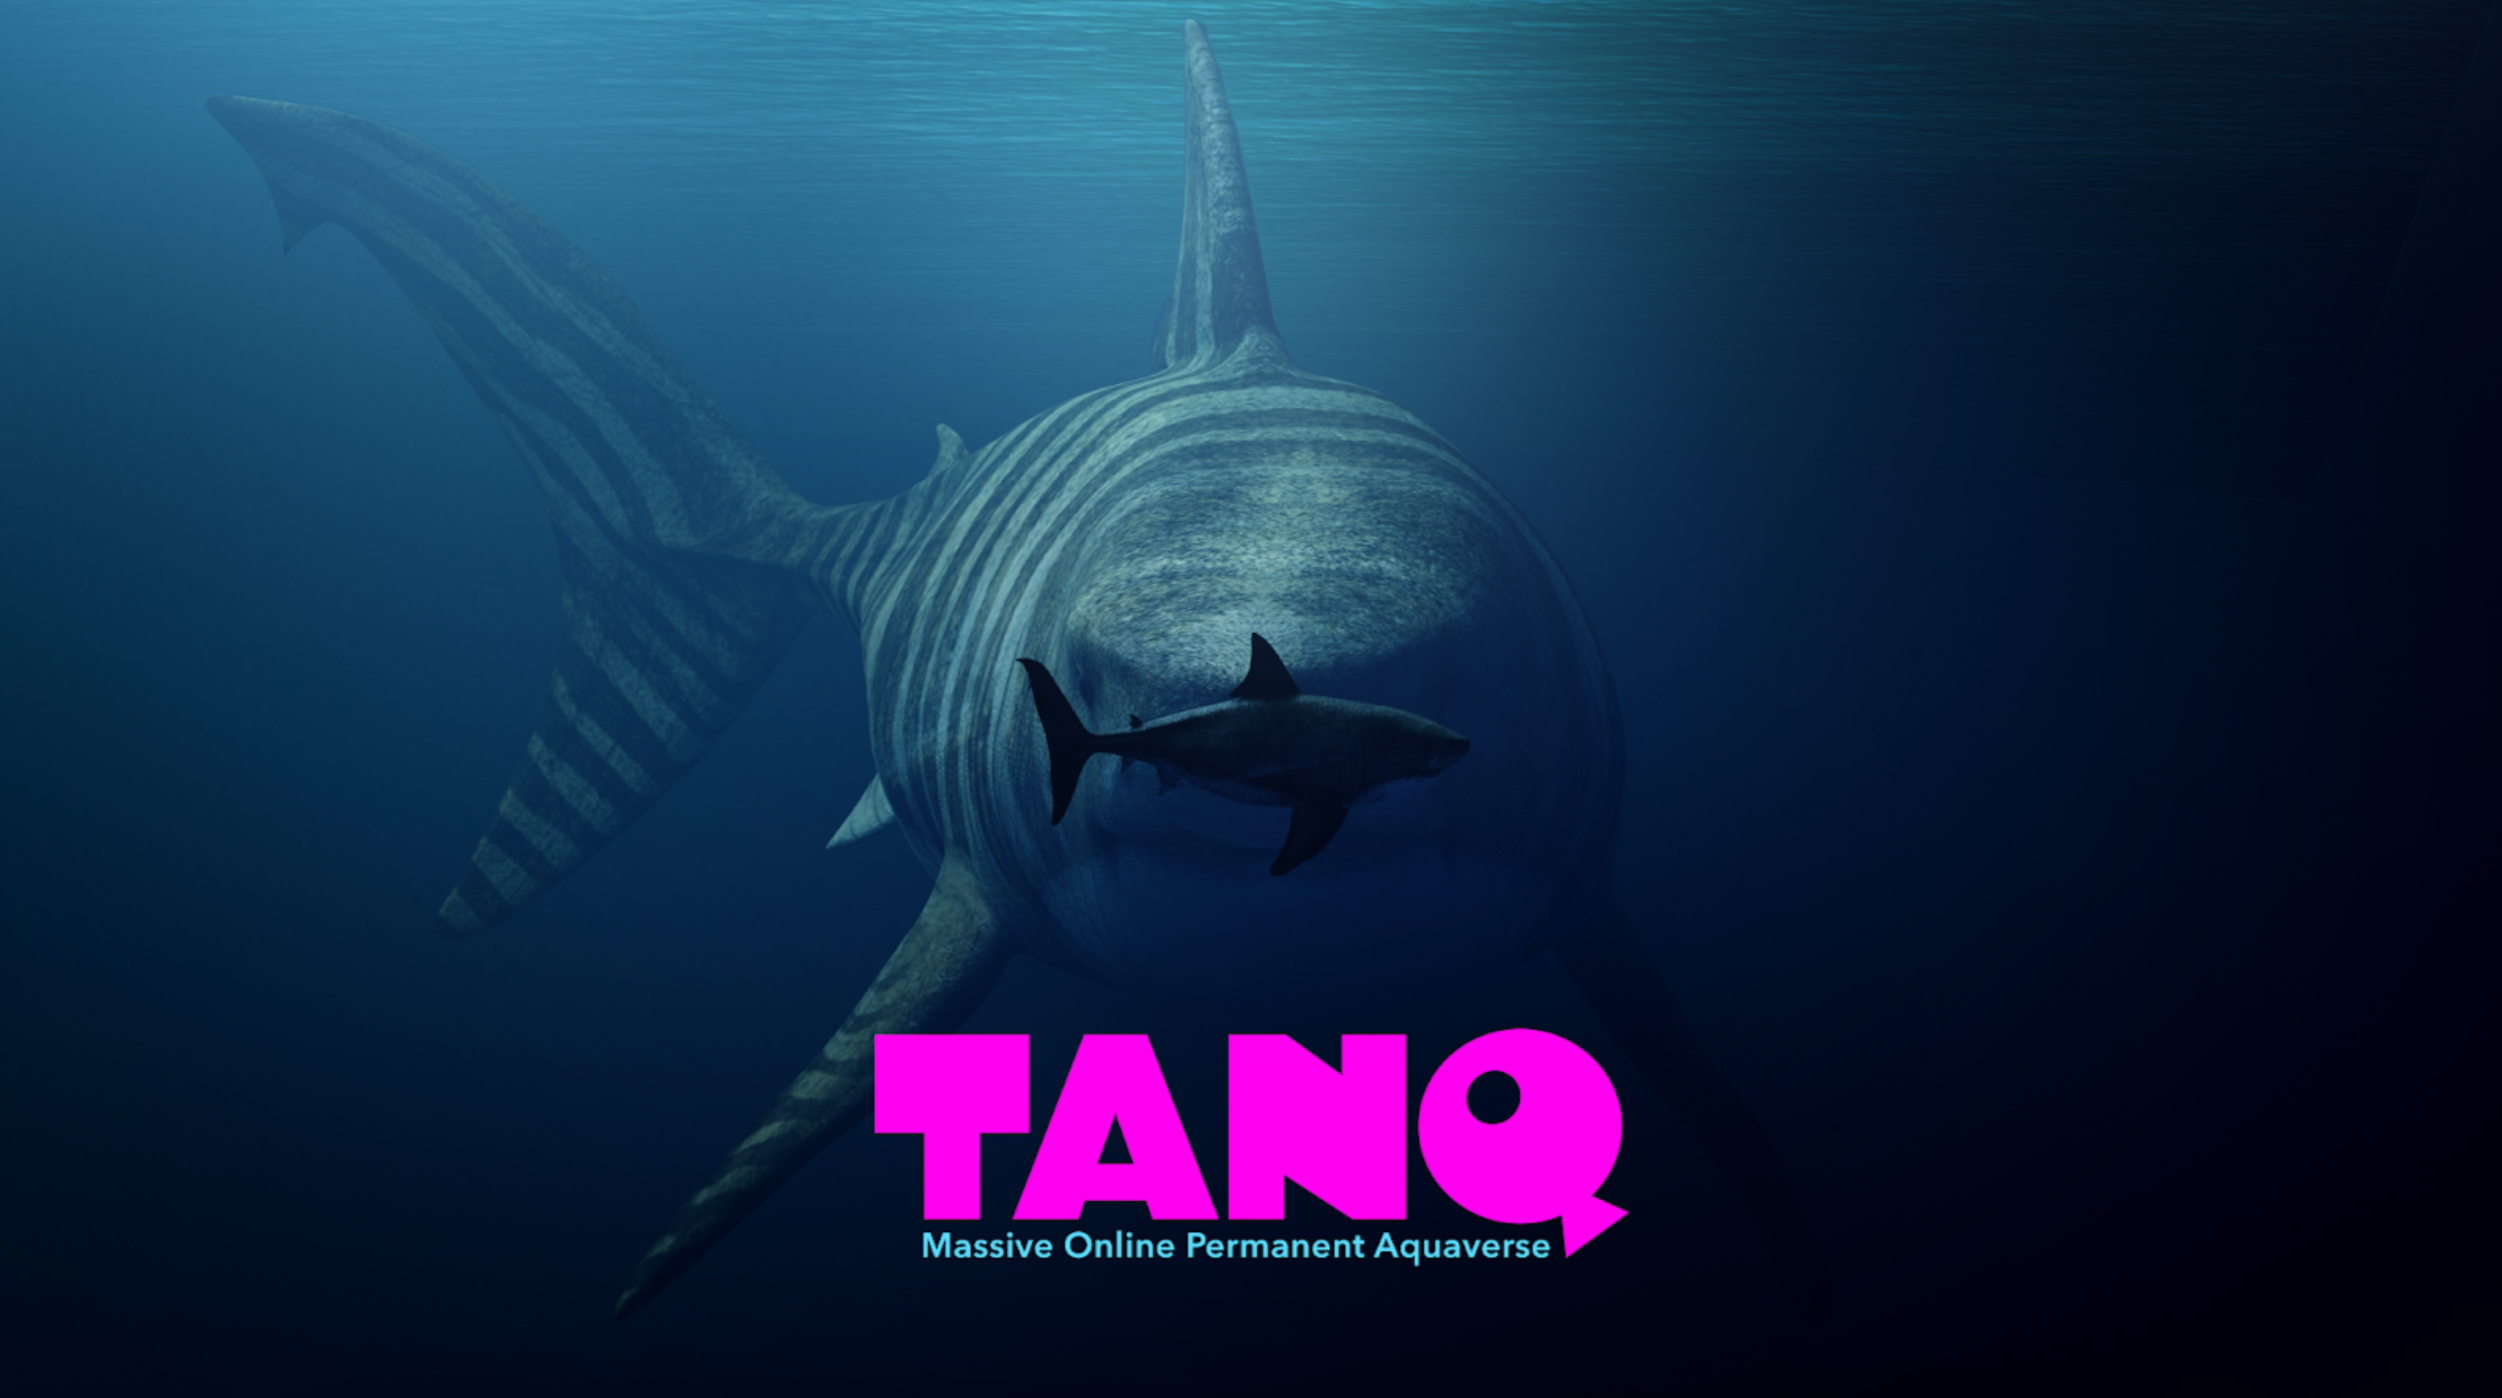 An aquatic universe waiting for you to dive in… TANQ — THE AQUAVERSE